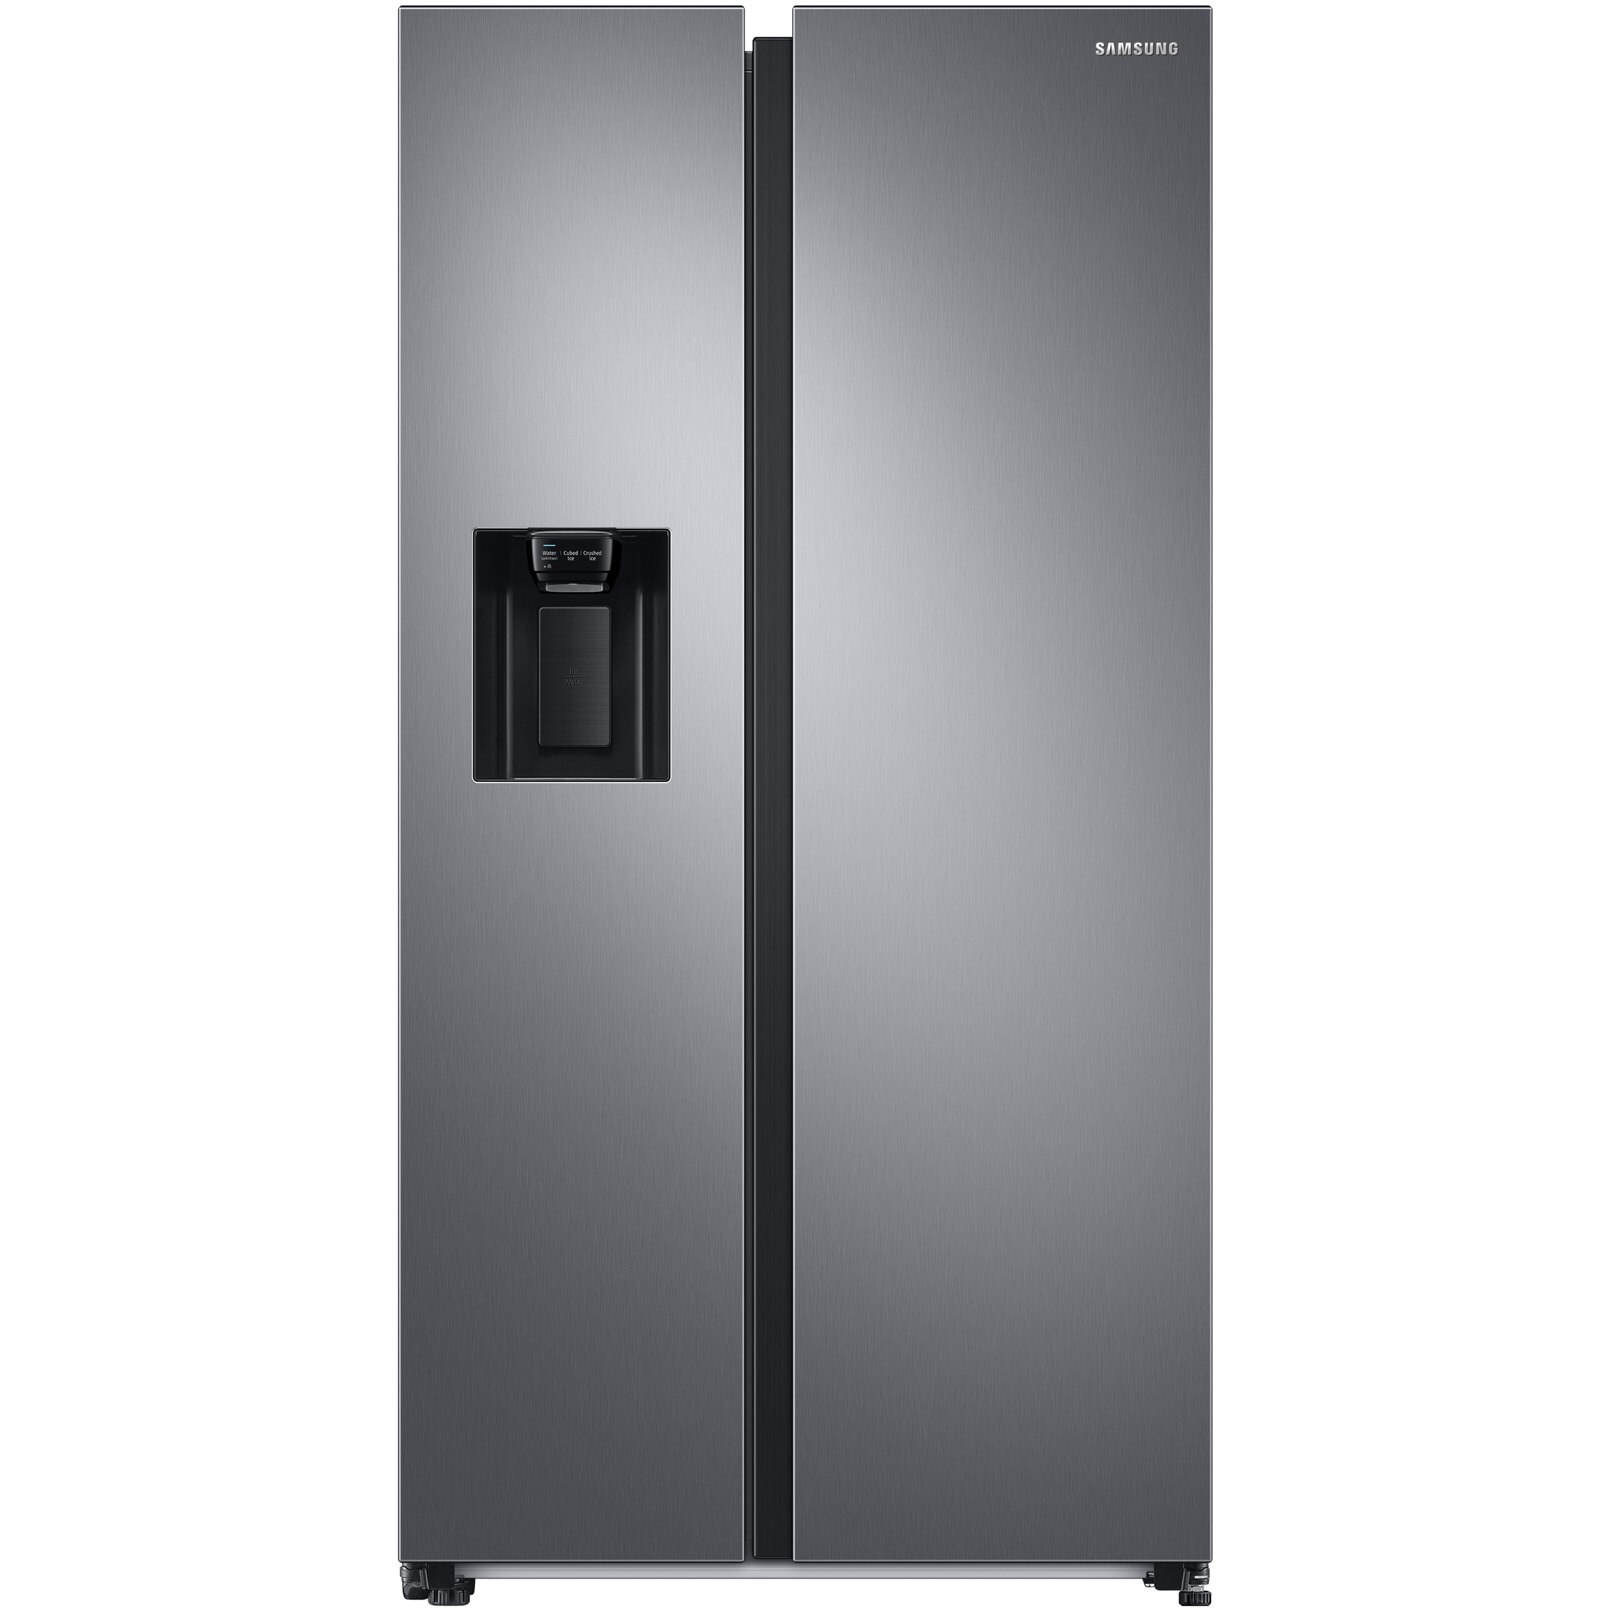 Fotografie Side By Side Samsung RS68A8520S9/EF, 609 l, Clasa F, Full No Frost, Twin Cooling Plus, Conversie Smart 5 in 1, Non-Plumbing, SpaceMax, Compresor Digital Inverter, Dozator apa, Inox